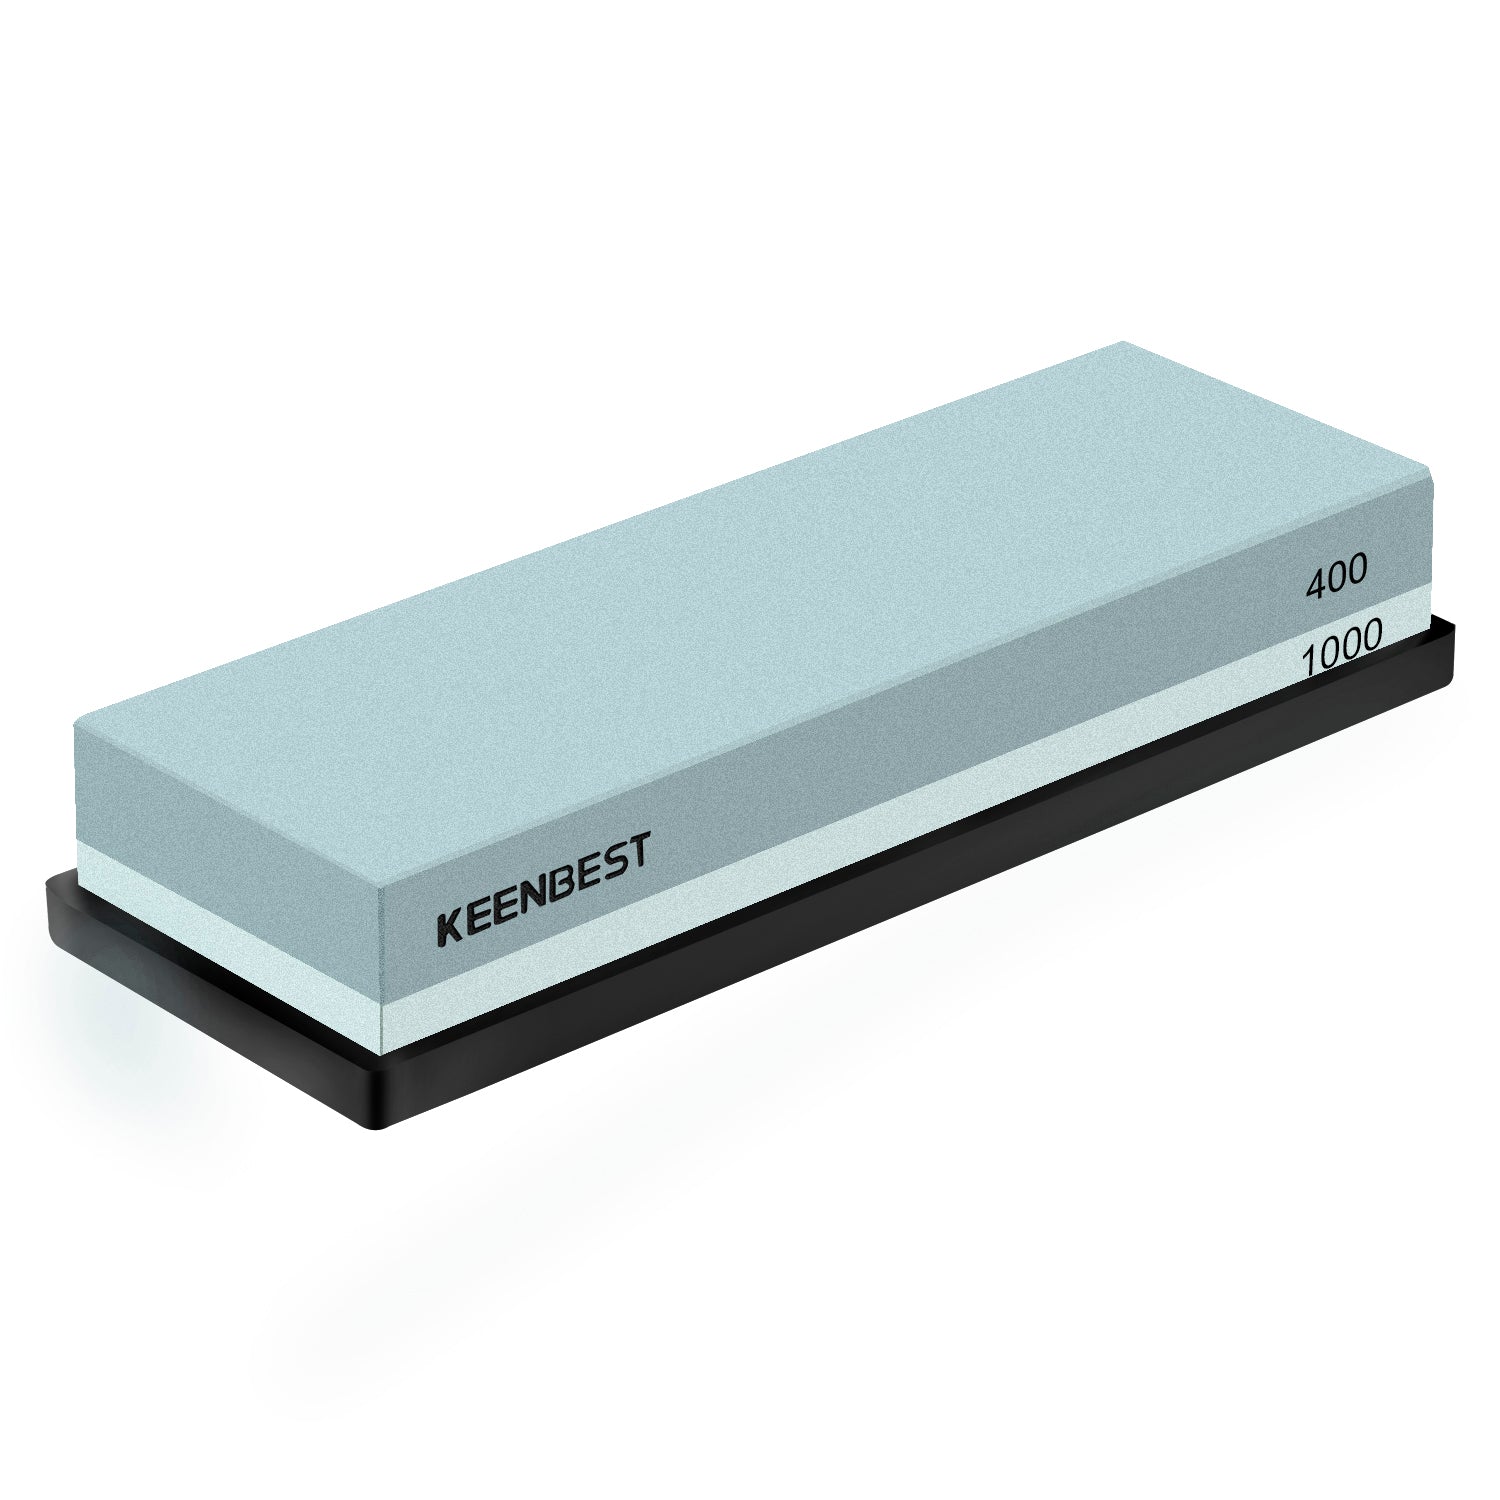 Knife Sharpening Stone 2-Pack - Dual 400/1000 Grit Wet Block - Sharpens and  Polishes Sharp Tools and Kitchen or Hunting Knives by Whetstone